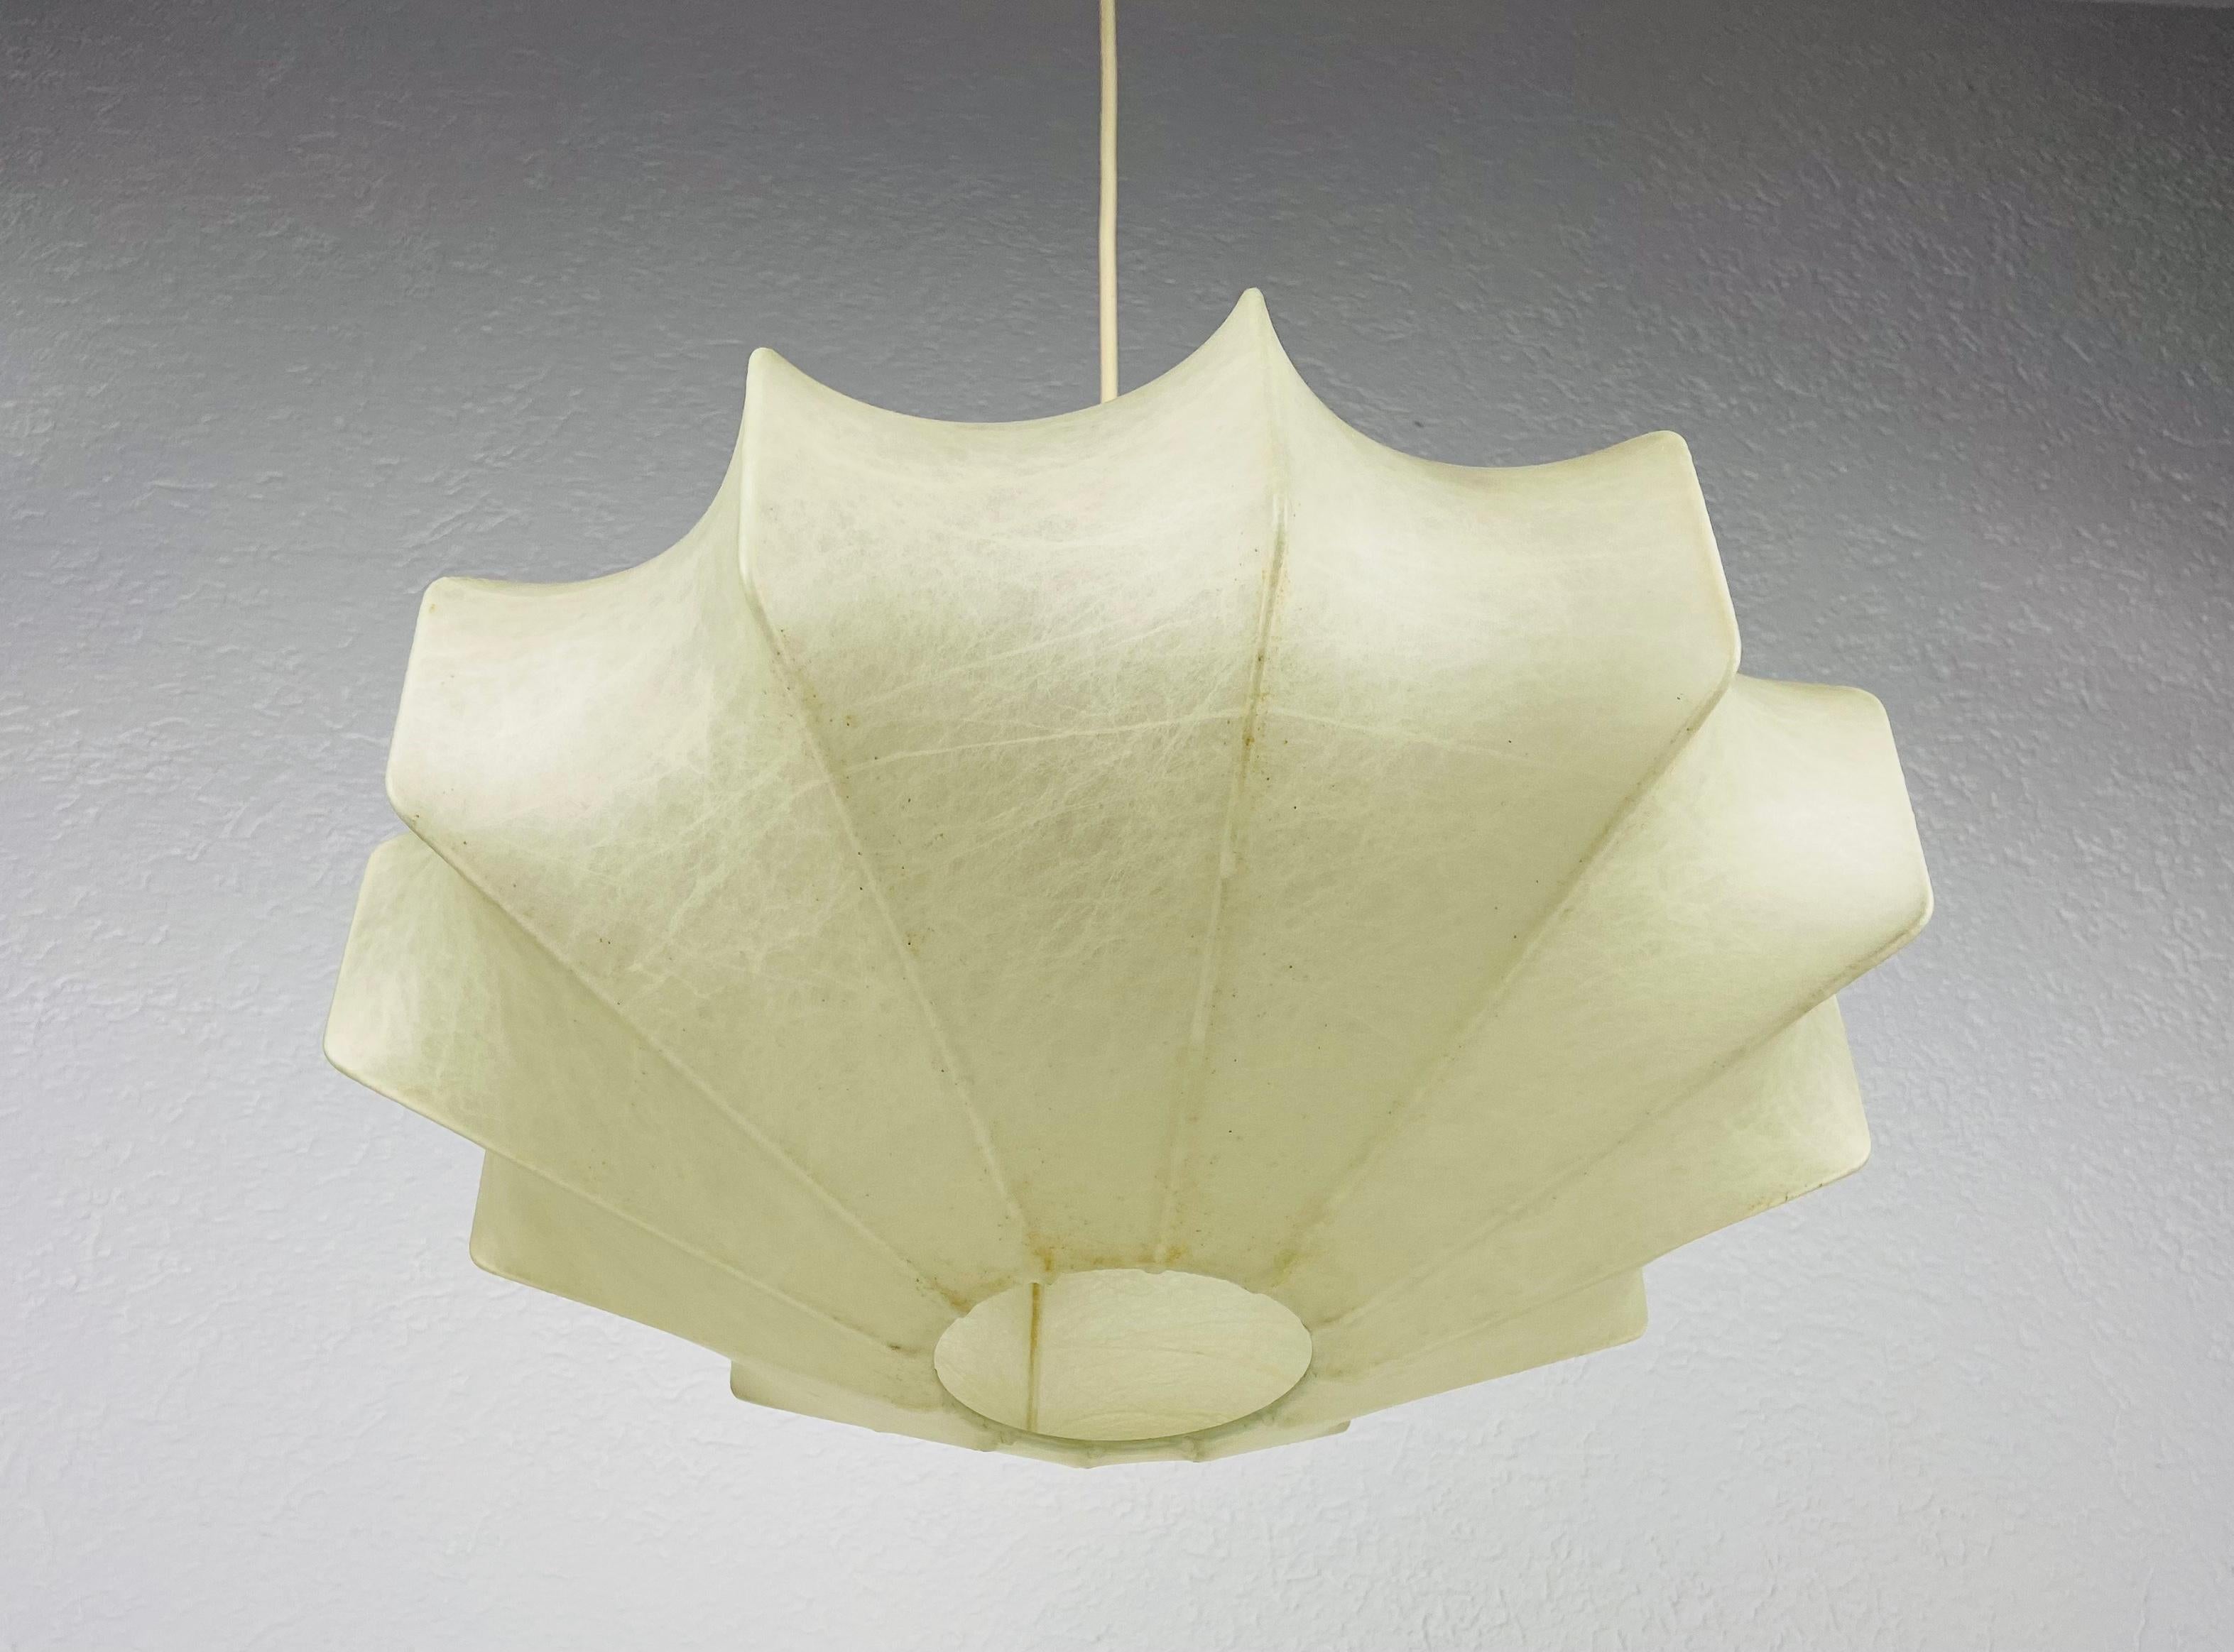 A losange cocoon pendant lamp made in Italy in the 1960s. The hanging lamp has a design similar to the lightings made by Achille Castiglioni. The lamp shade is of original resin and has a losange shape.

The light requires one E27 (US E26) light